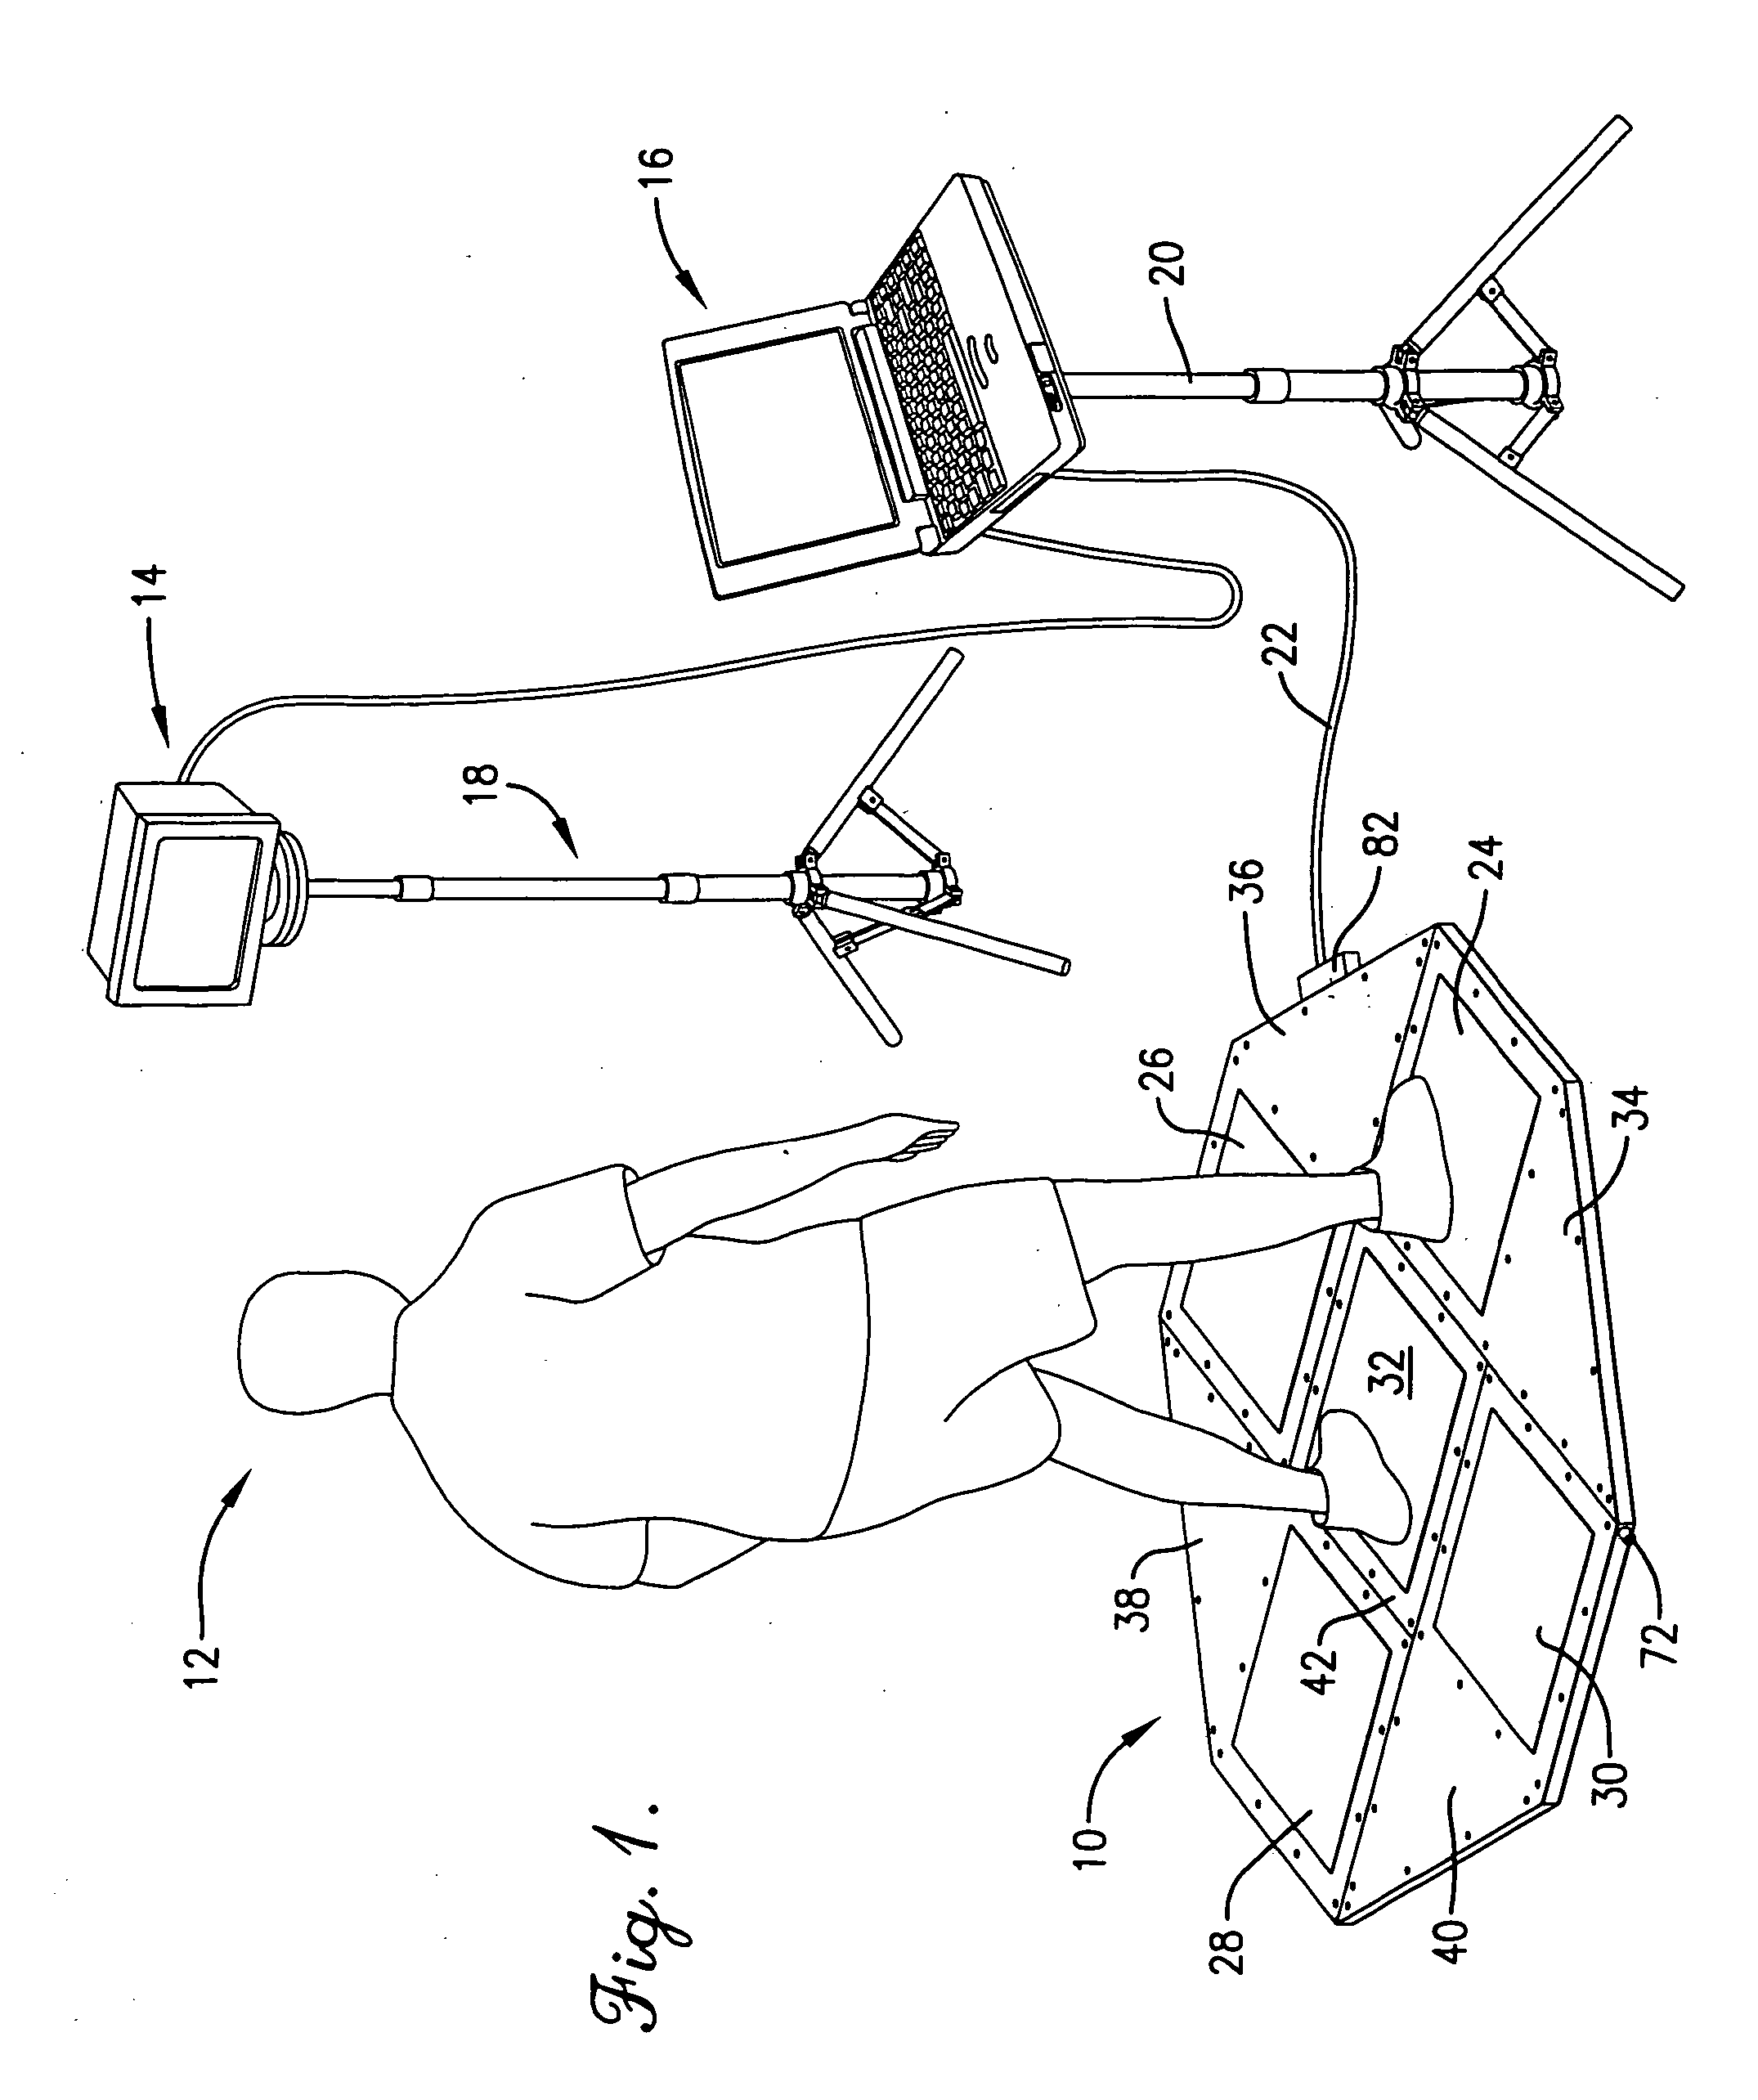 Method and apparatus for oculomotor performance testing